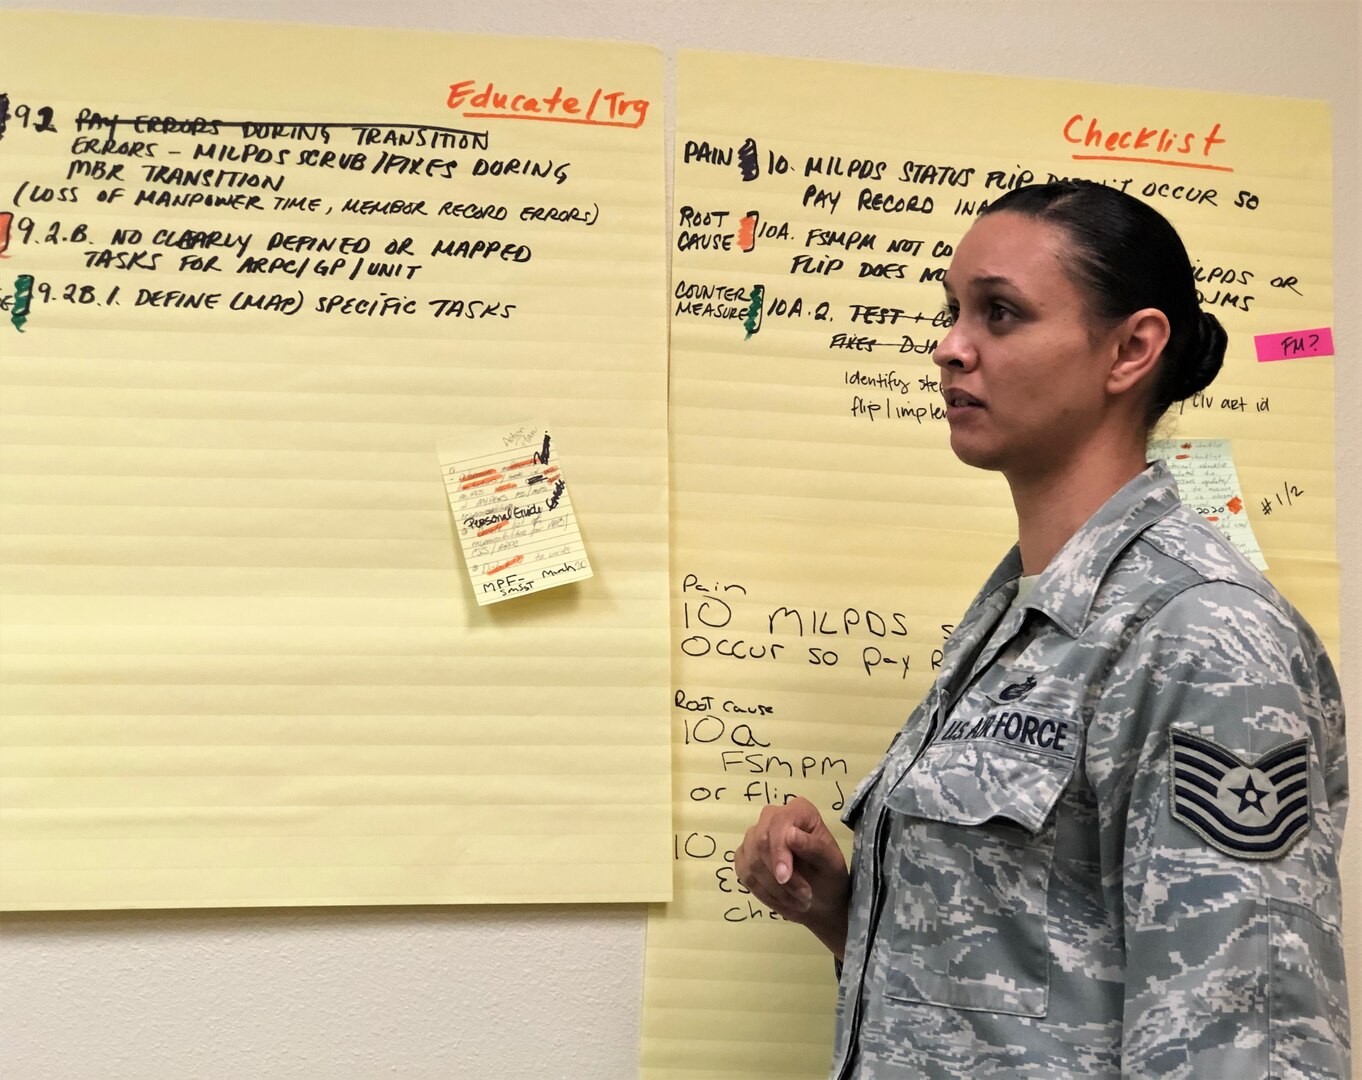 Tech. Sgt. Janina White, 340th Flying Training Group force management non-commissioned officer in charge, highlights counter measures her group devised at the Nov. 19-21 continuous process improvement event at Joint Base San Antonio-Randolph, Texas, to address pay issues that occur when Reserve members transition between pay statuses. (U.S. Air Force photo by Janis El Shabazz)